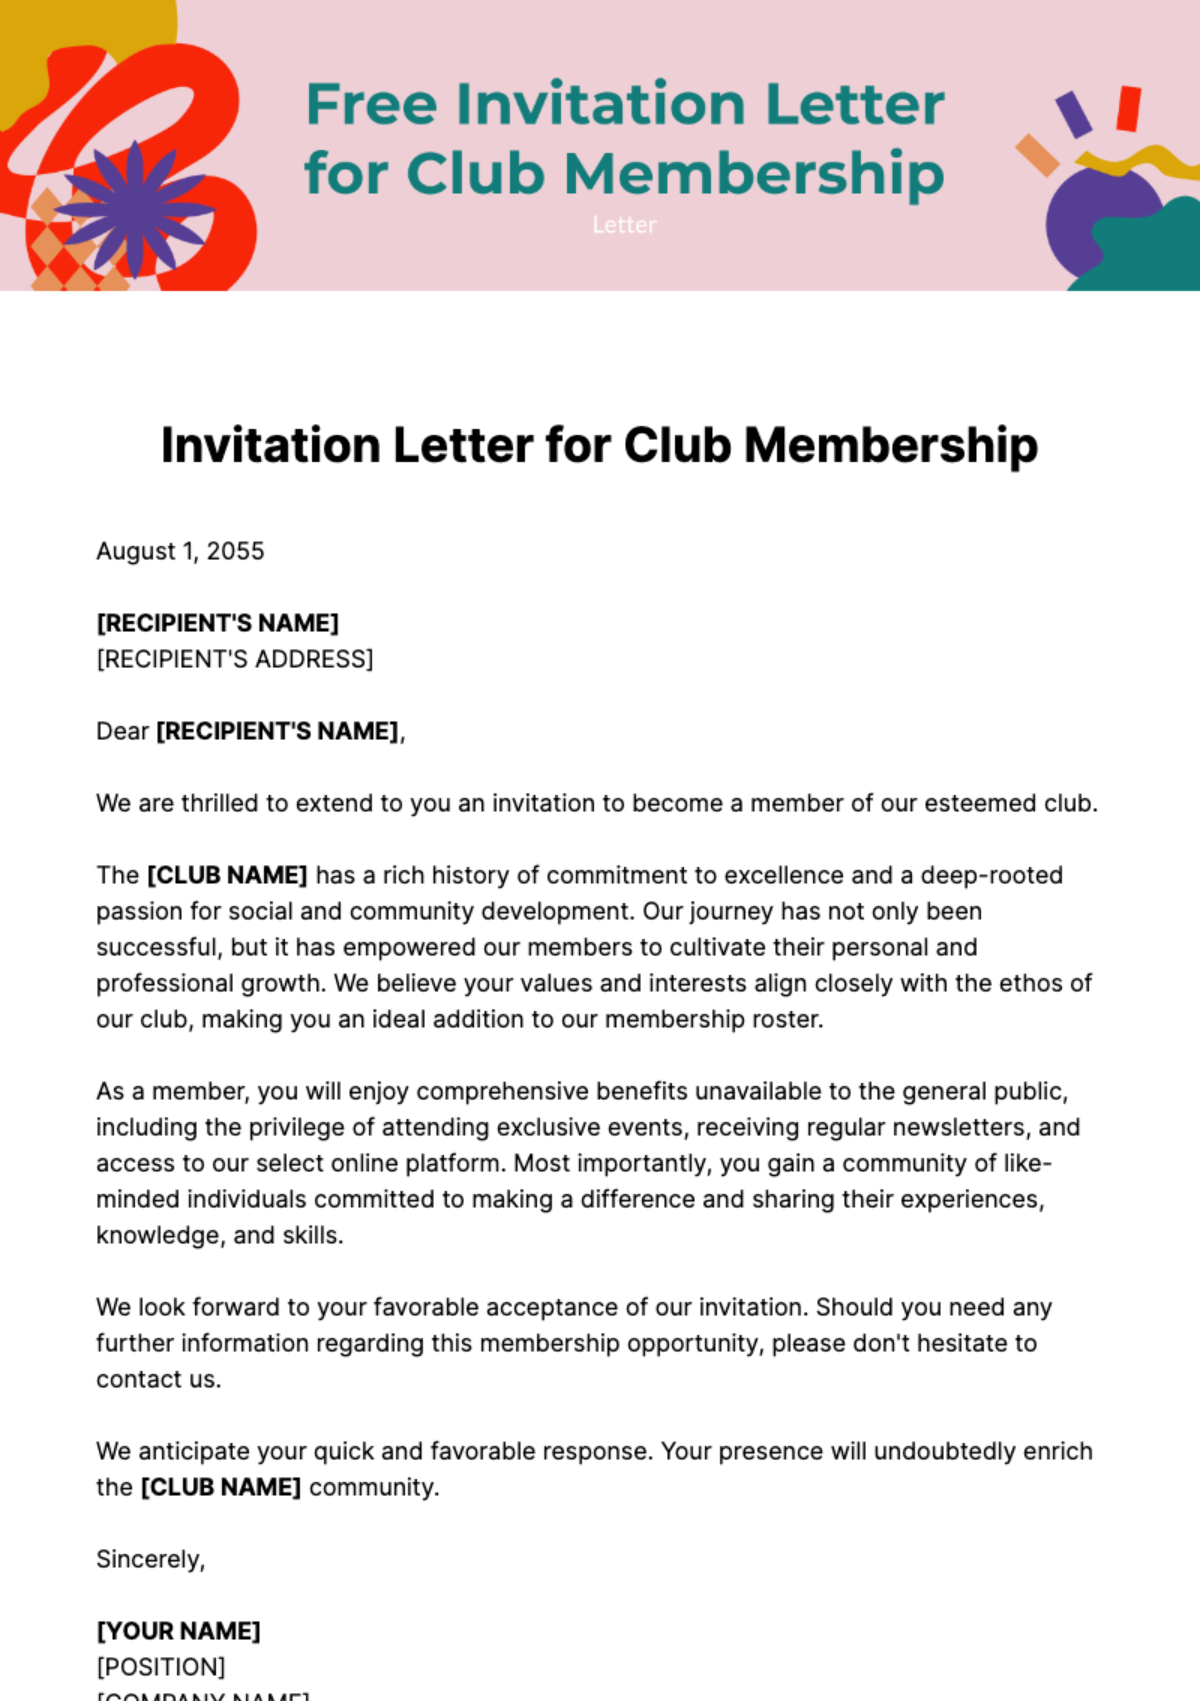 Free Invitation Letter for Club Membership Template